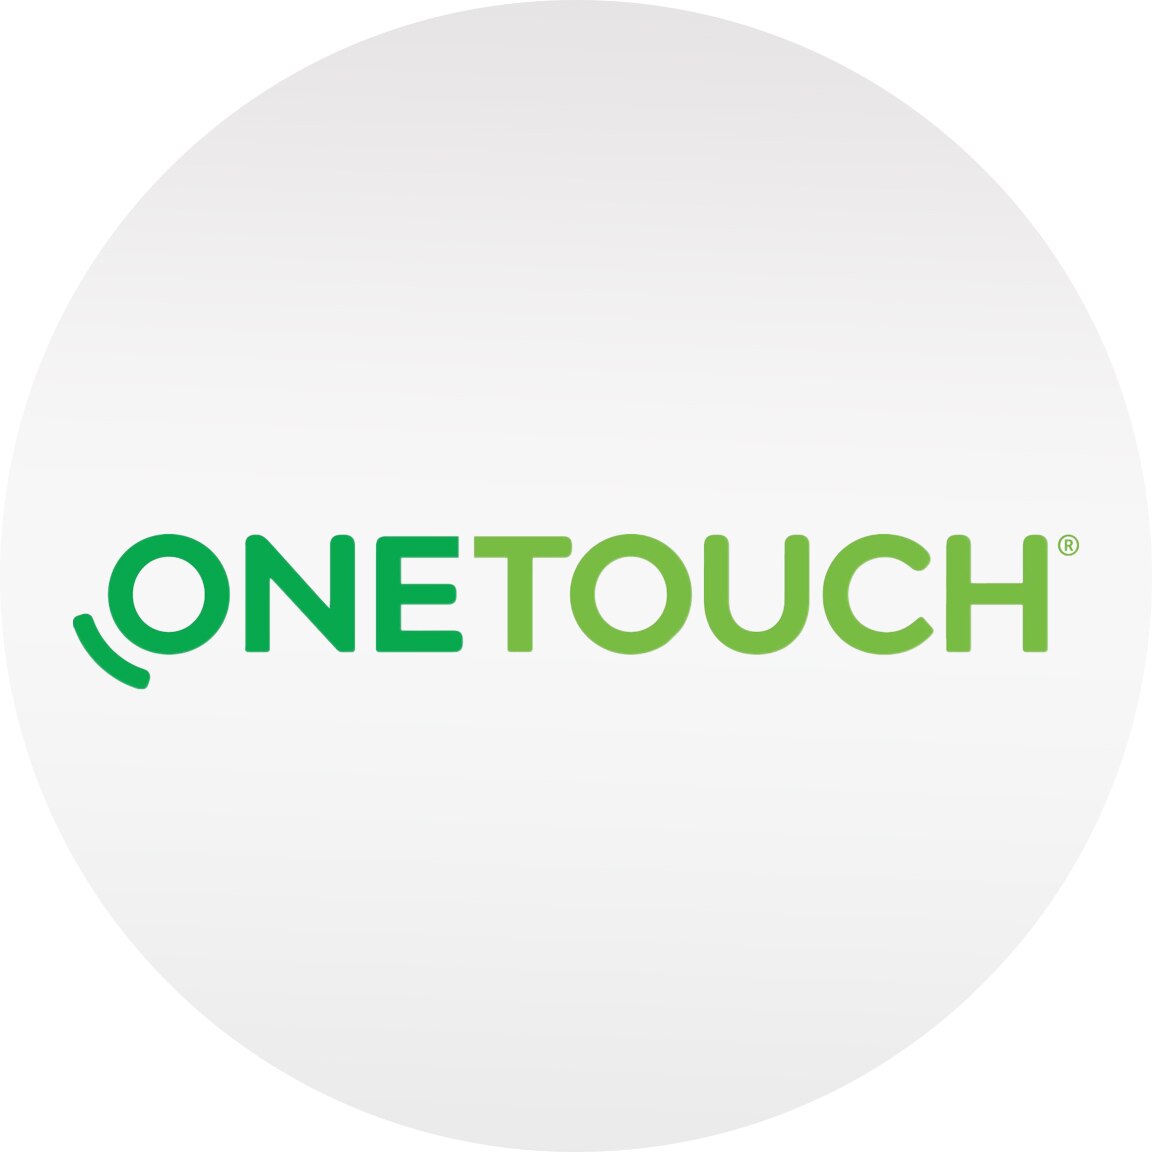 Shop for Onetouch® brand products